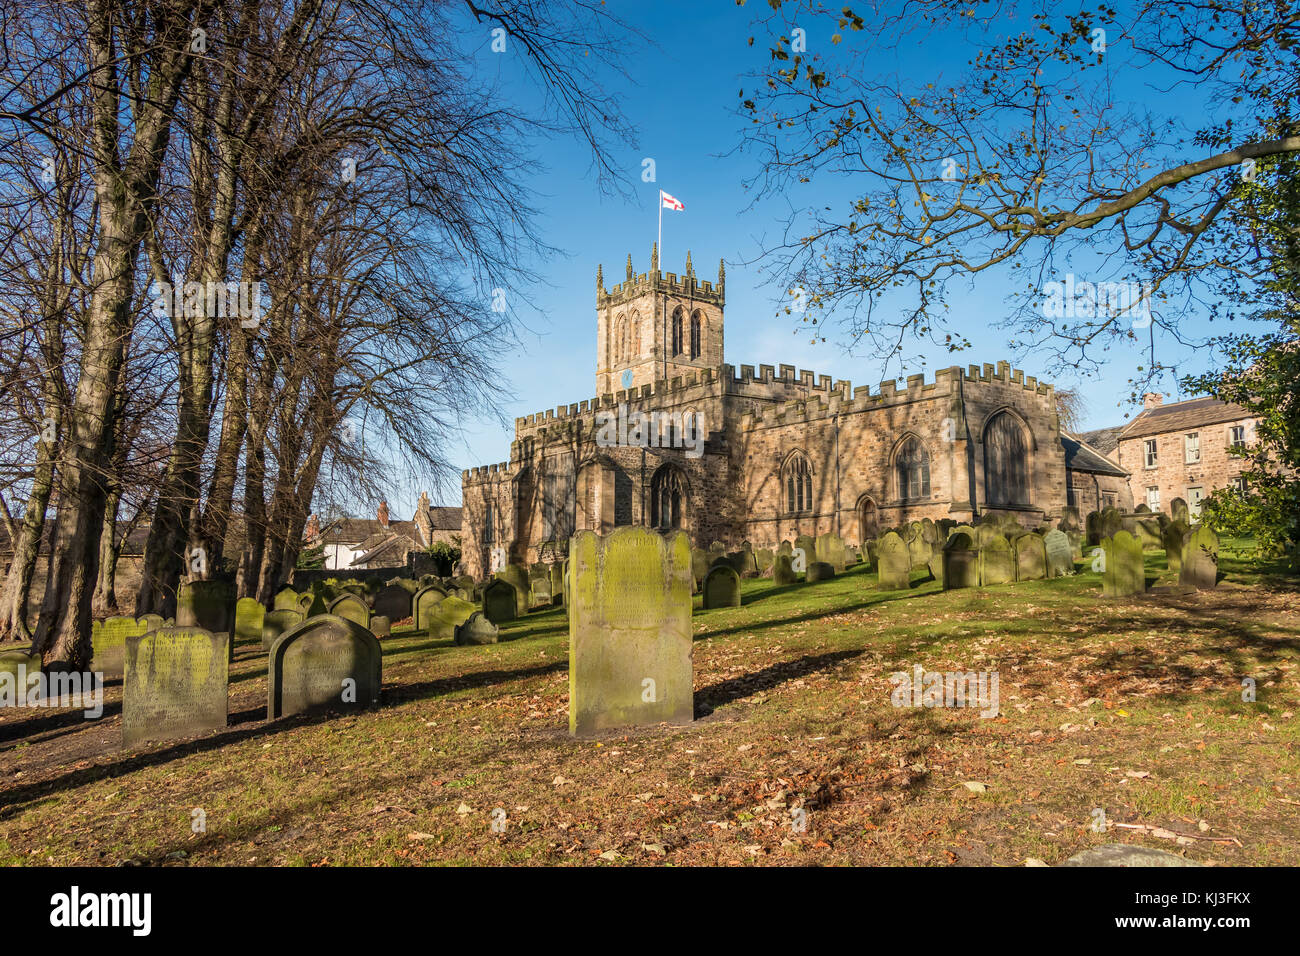 The grade 1 listed parish church of St Mary, Barnard Castle, County Durham, North East England, UK in strong autumn sunshine under a clear blue sky Stock Photo